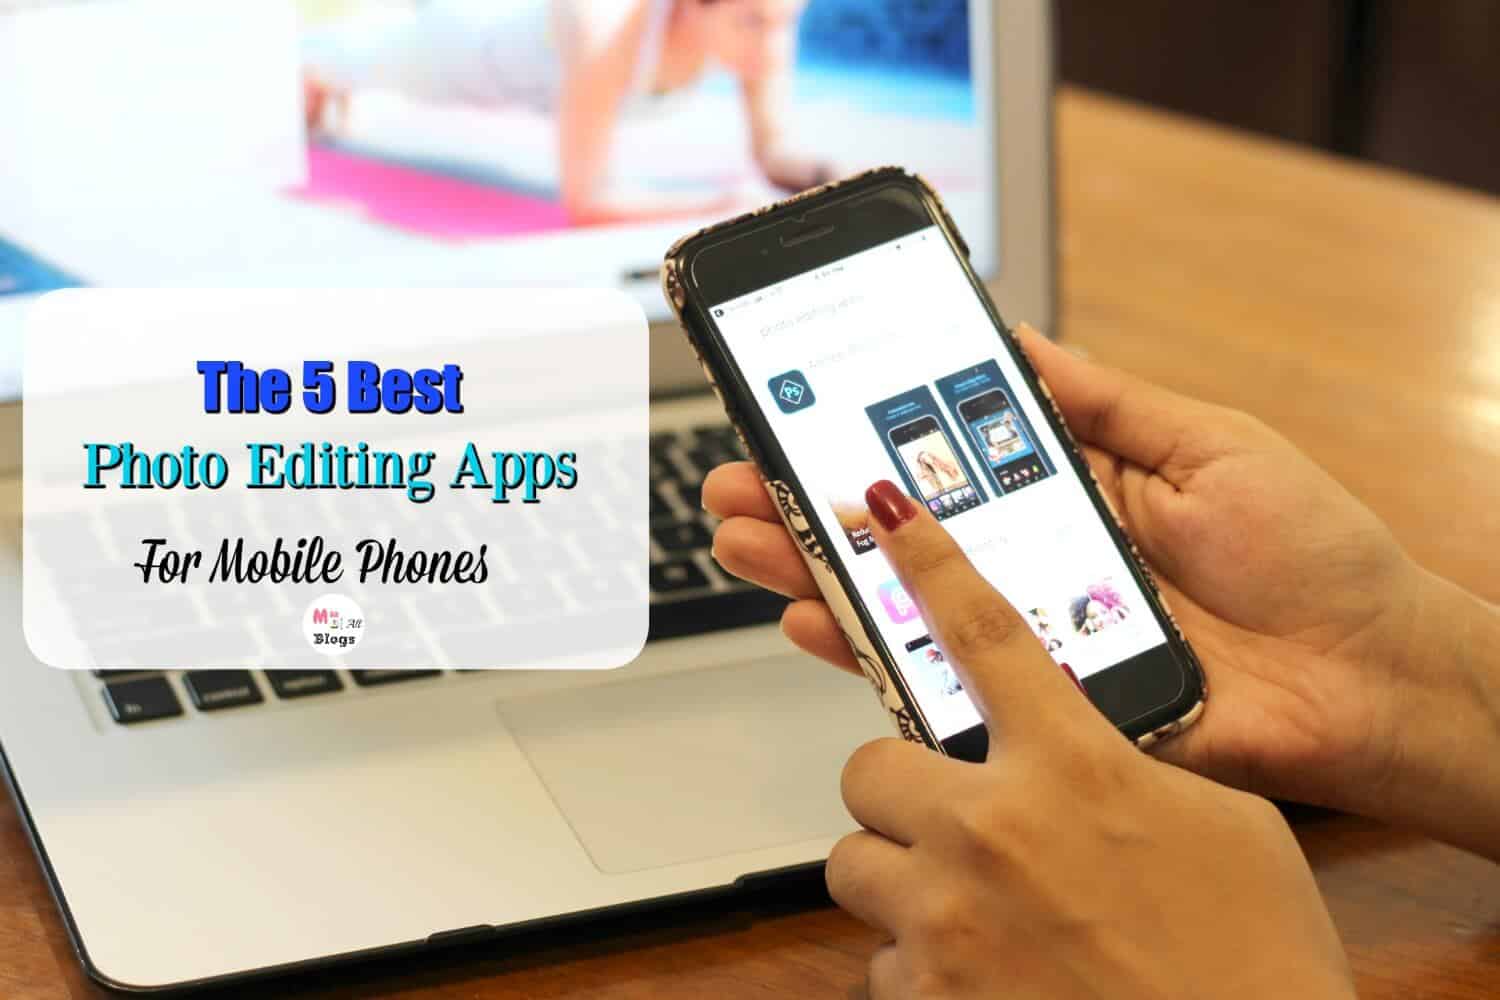 cell phone video editor